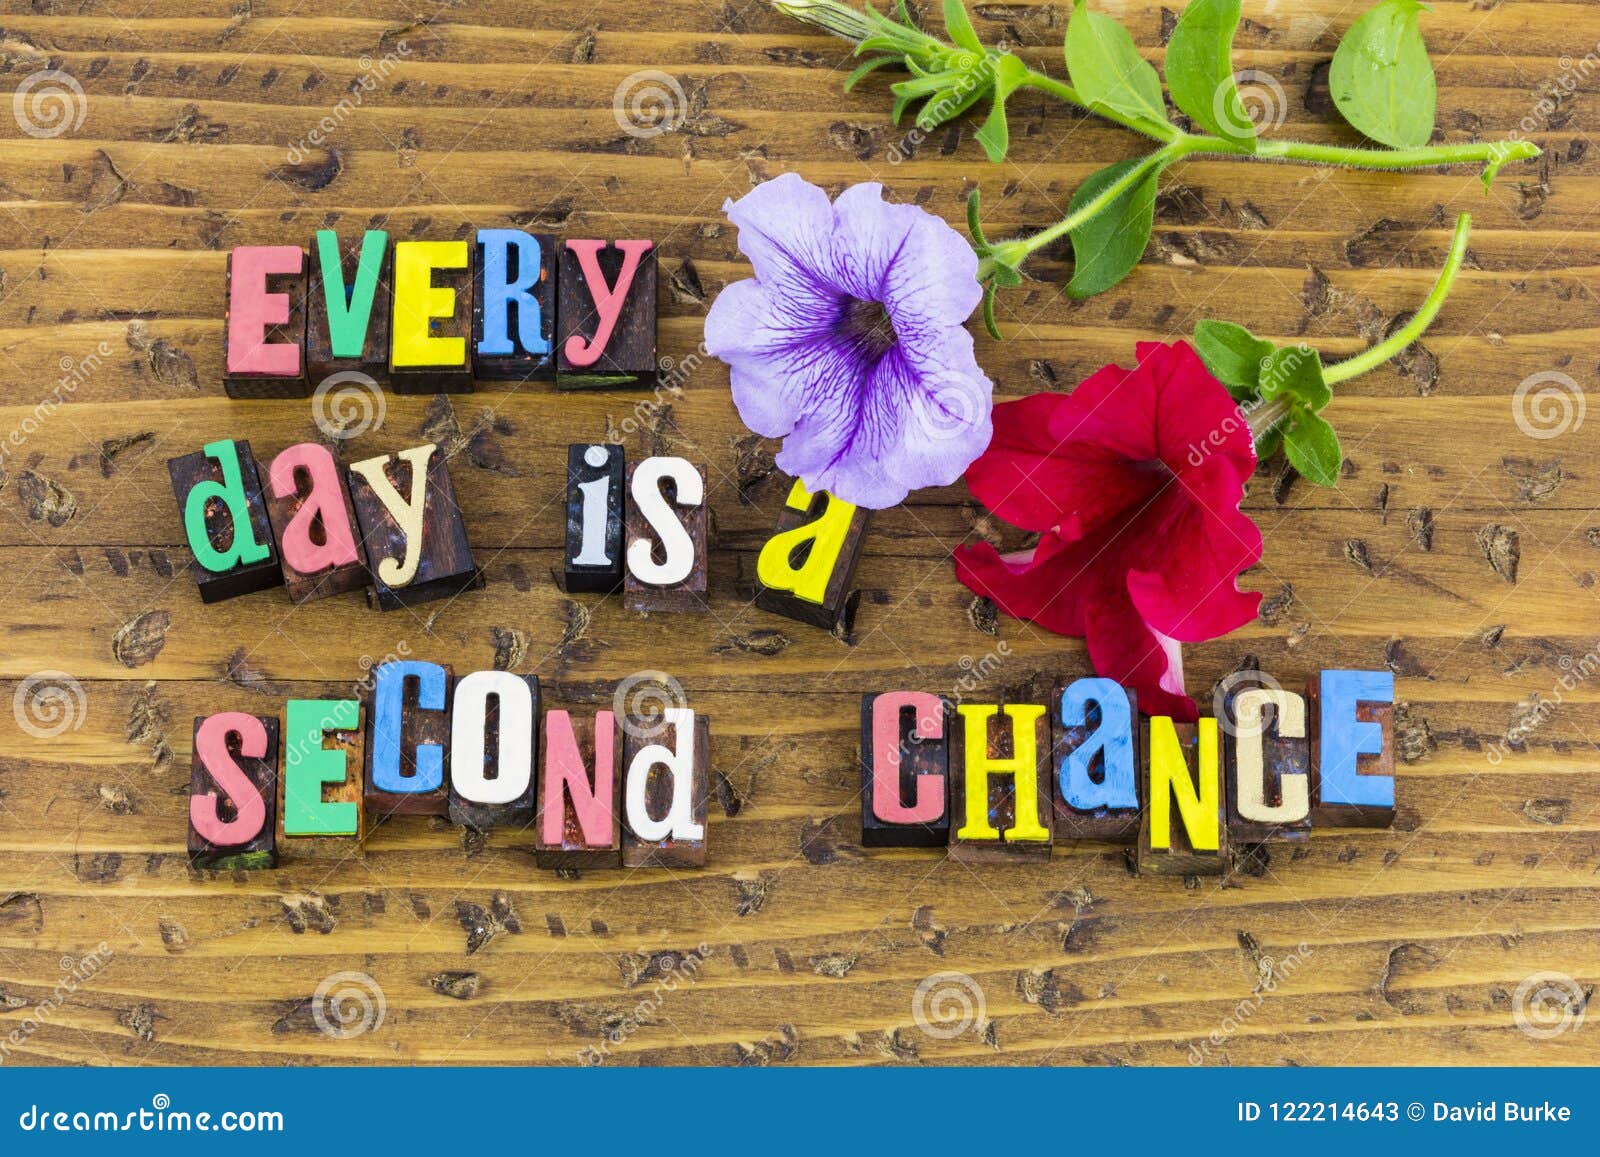 second chance opportunity believe relationship solution attitude success